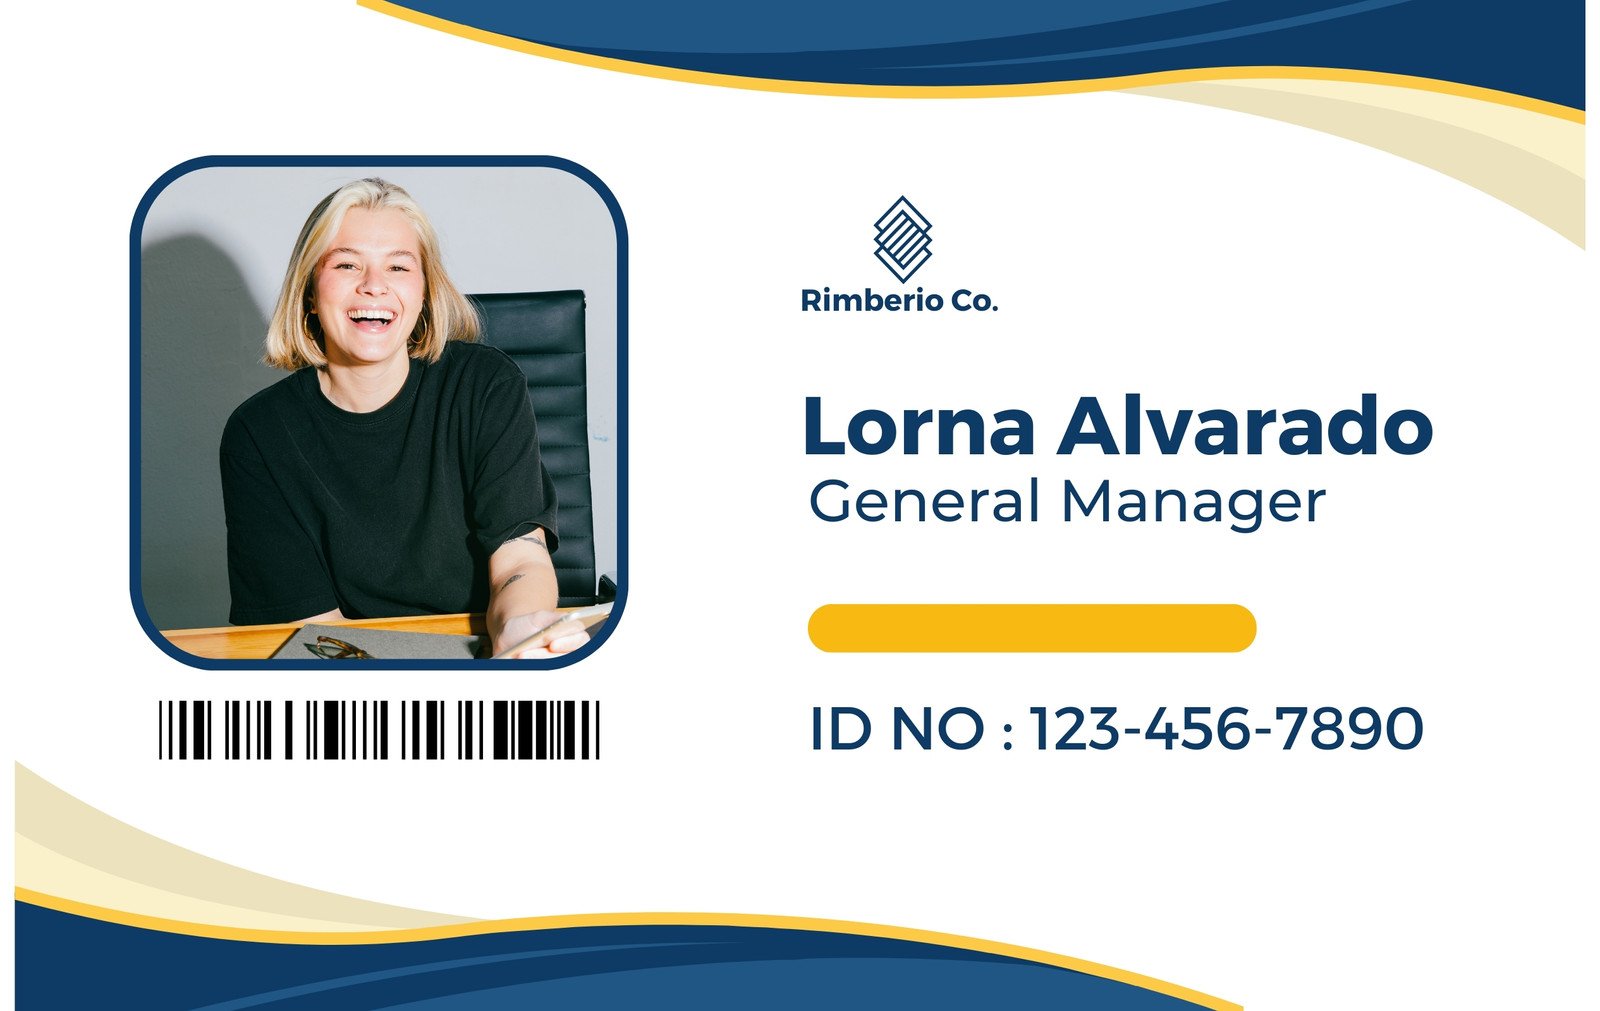 Custom Security Id Card With Company Name, Personalize Security